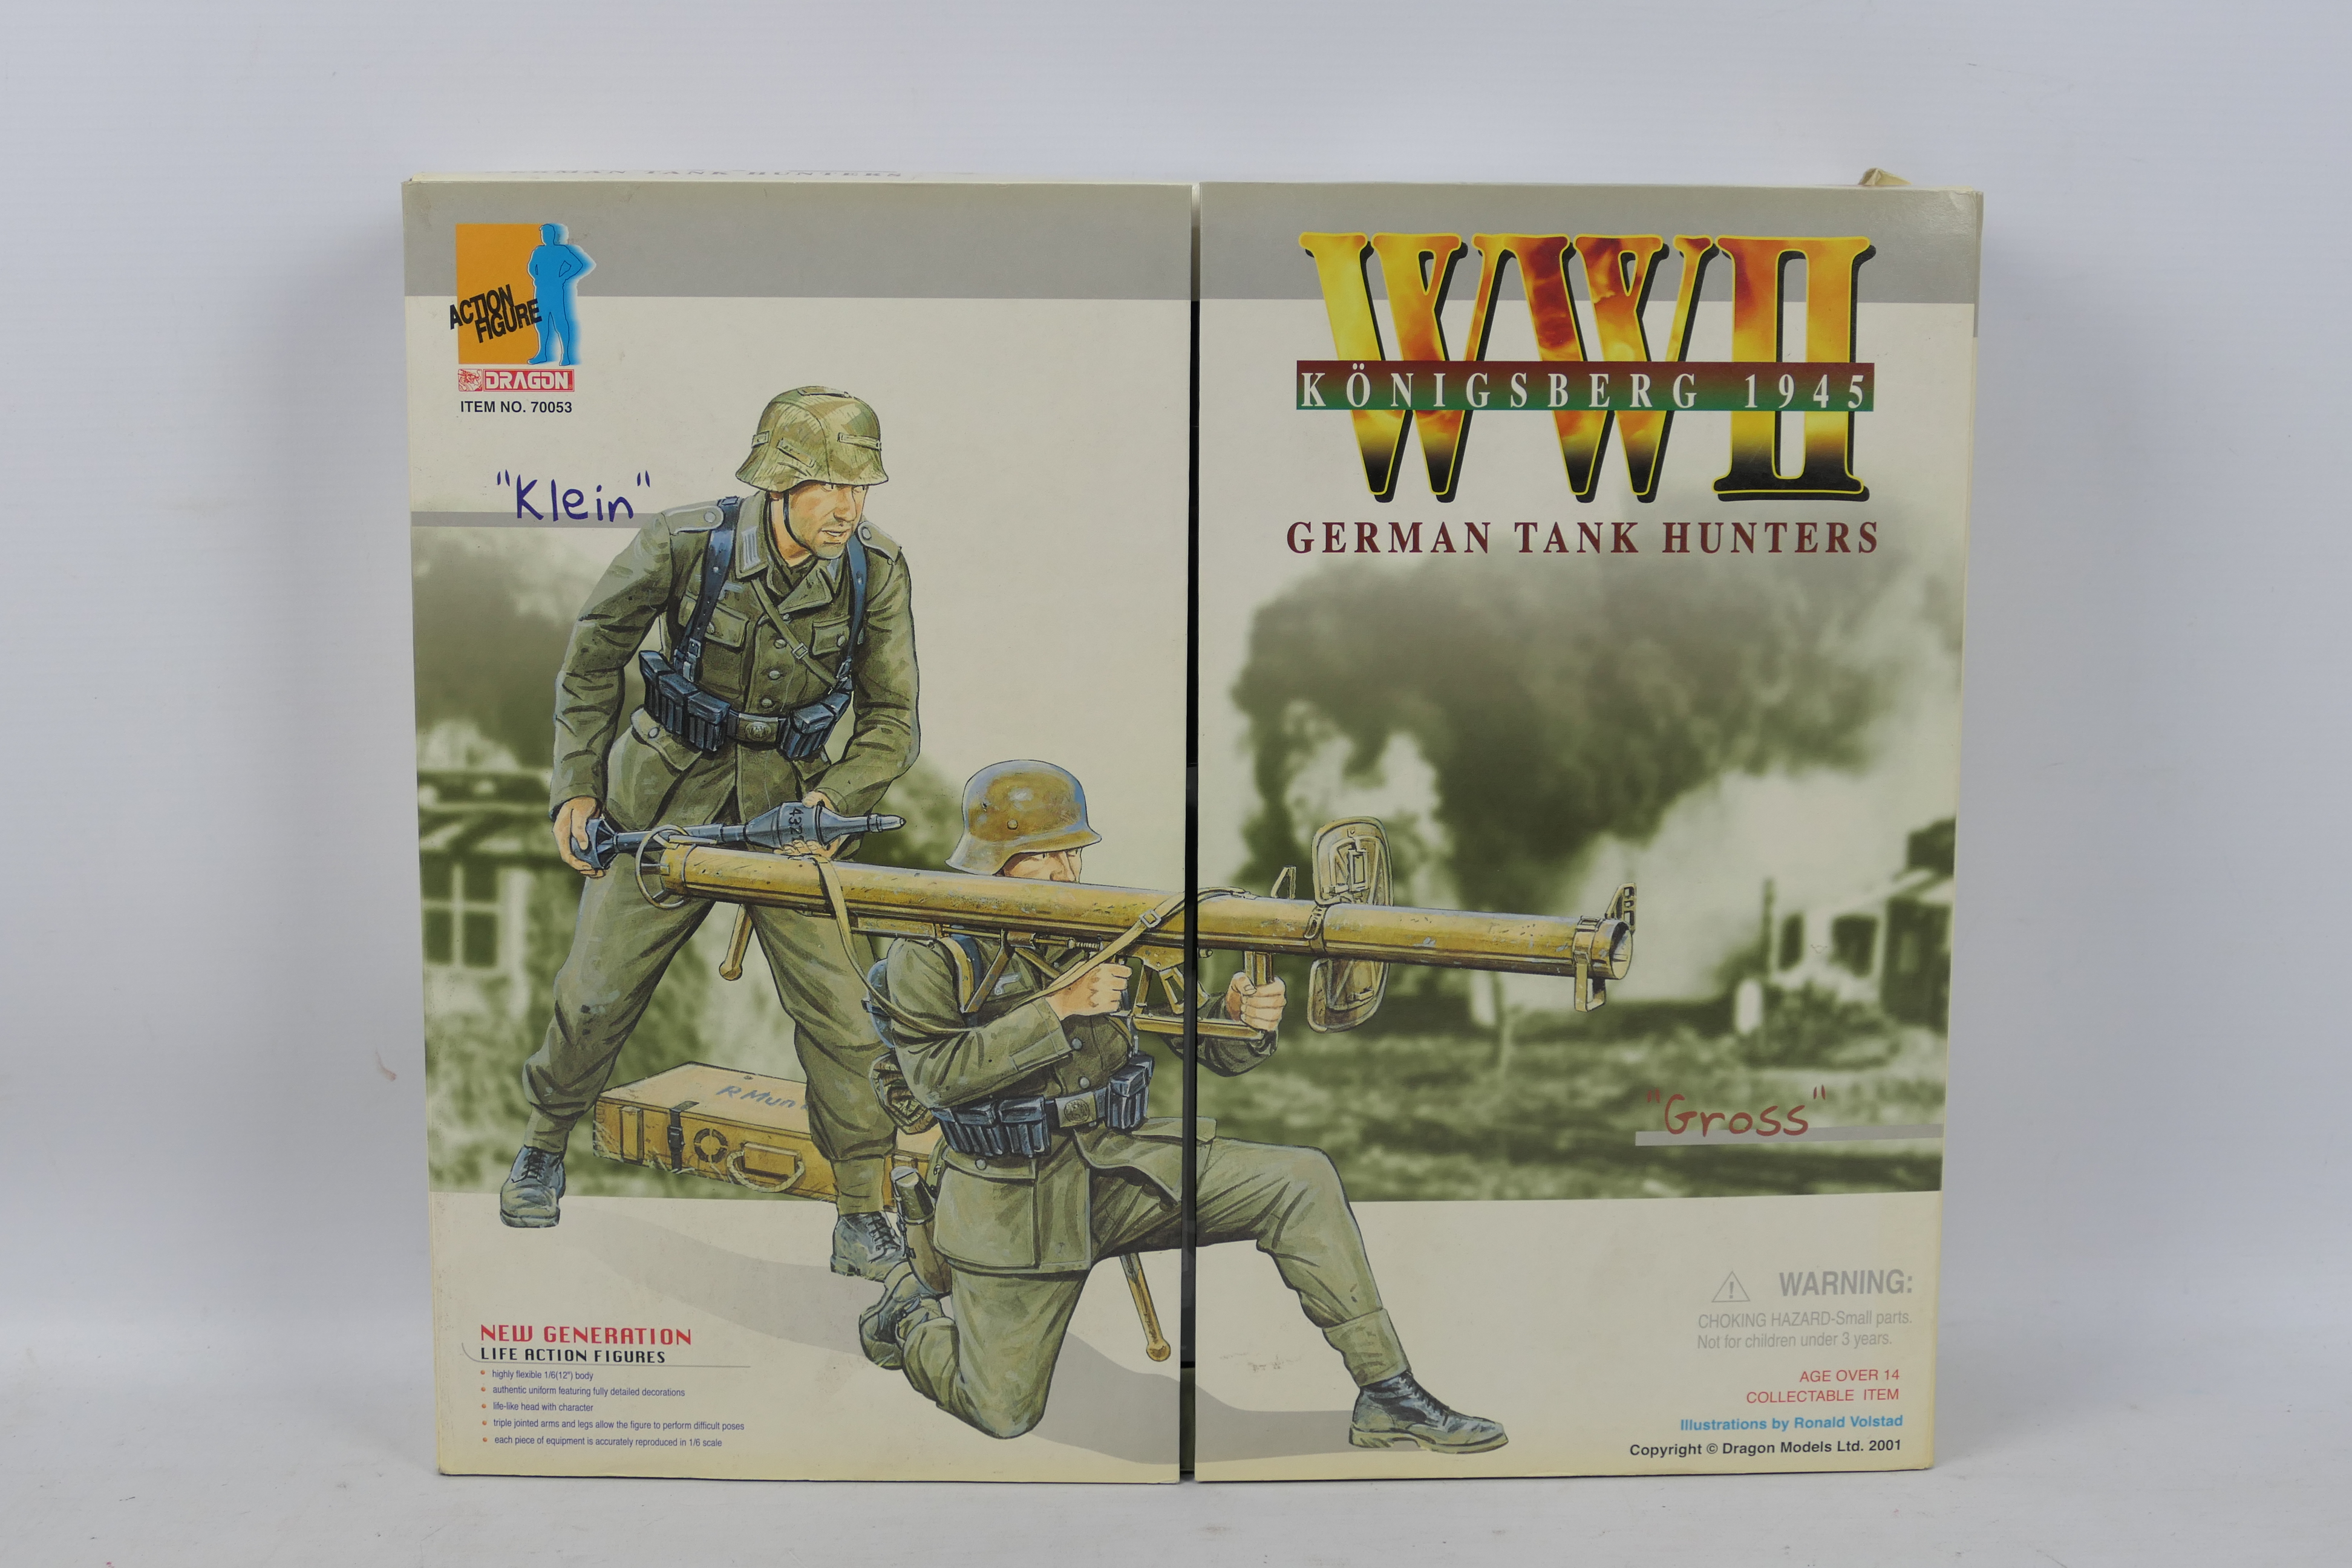 Dragon - A boxed Dragon two action figure set #70053 1:6 WW2 Konigsberg 1945 "Klein" and "Gross" - Image 3 of 3